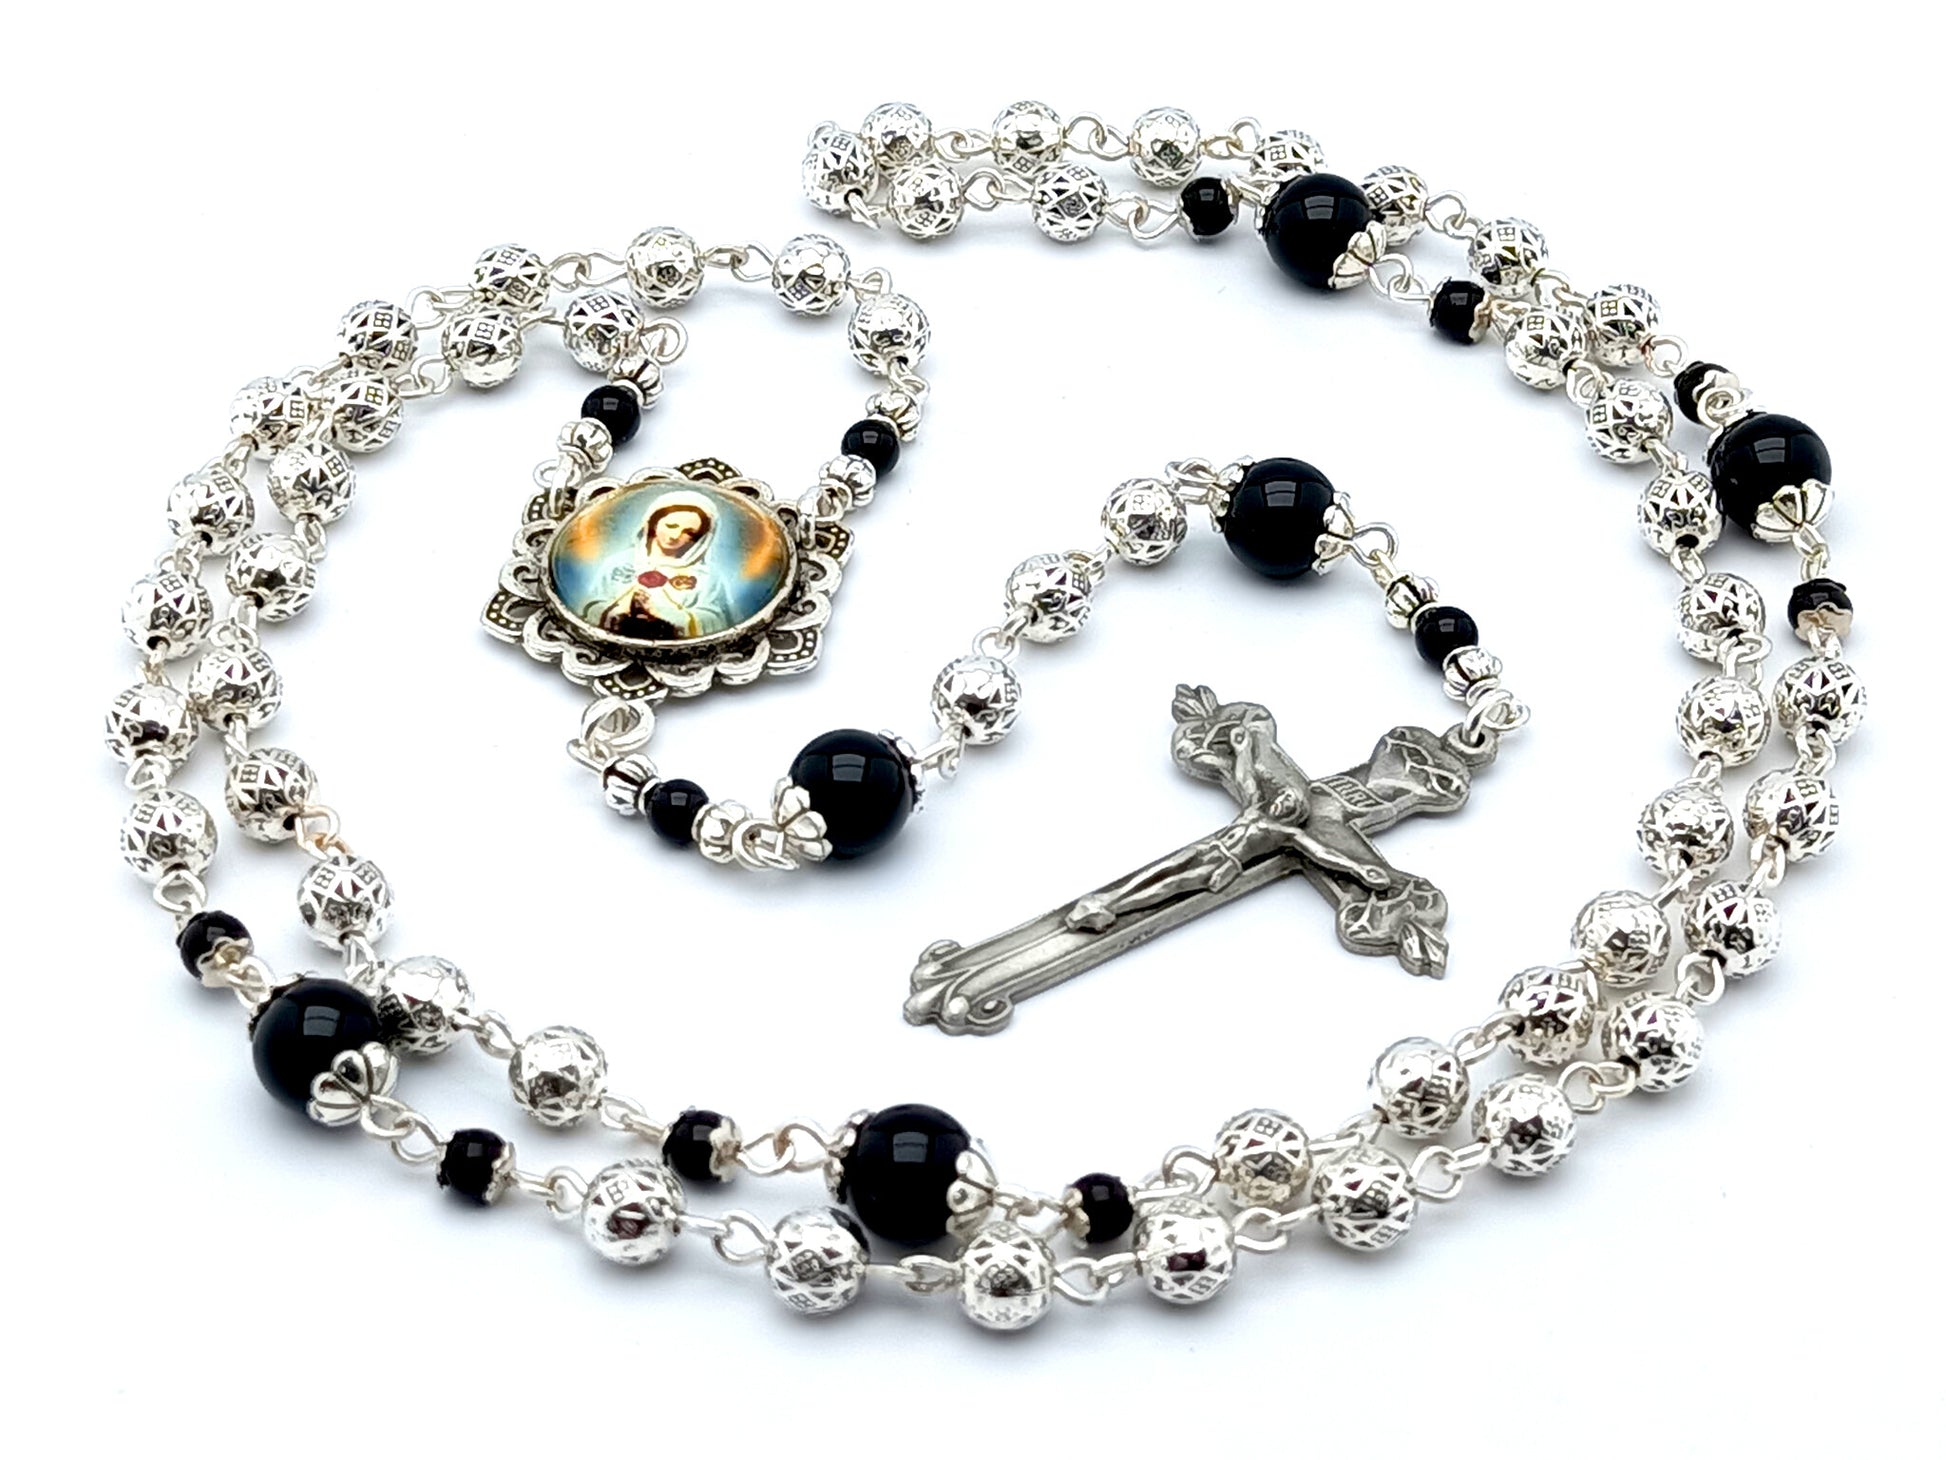 Maria Rosa Mystica unique rosary beads with small silver and onyx gemstone beads, pewter crucifix and silver picture centre medal.